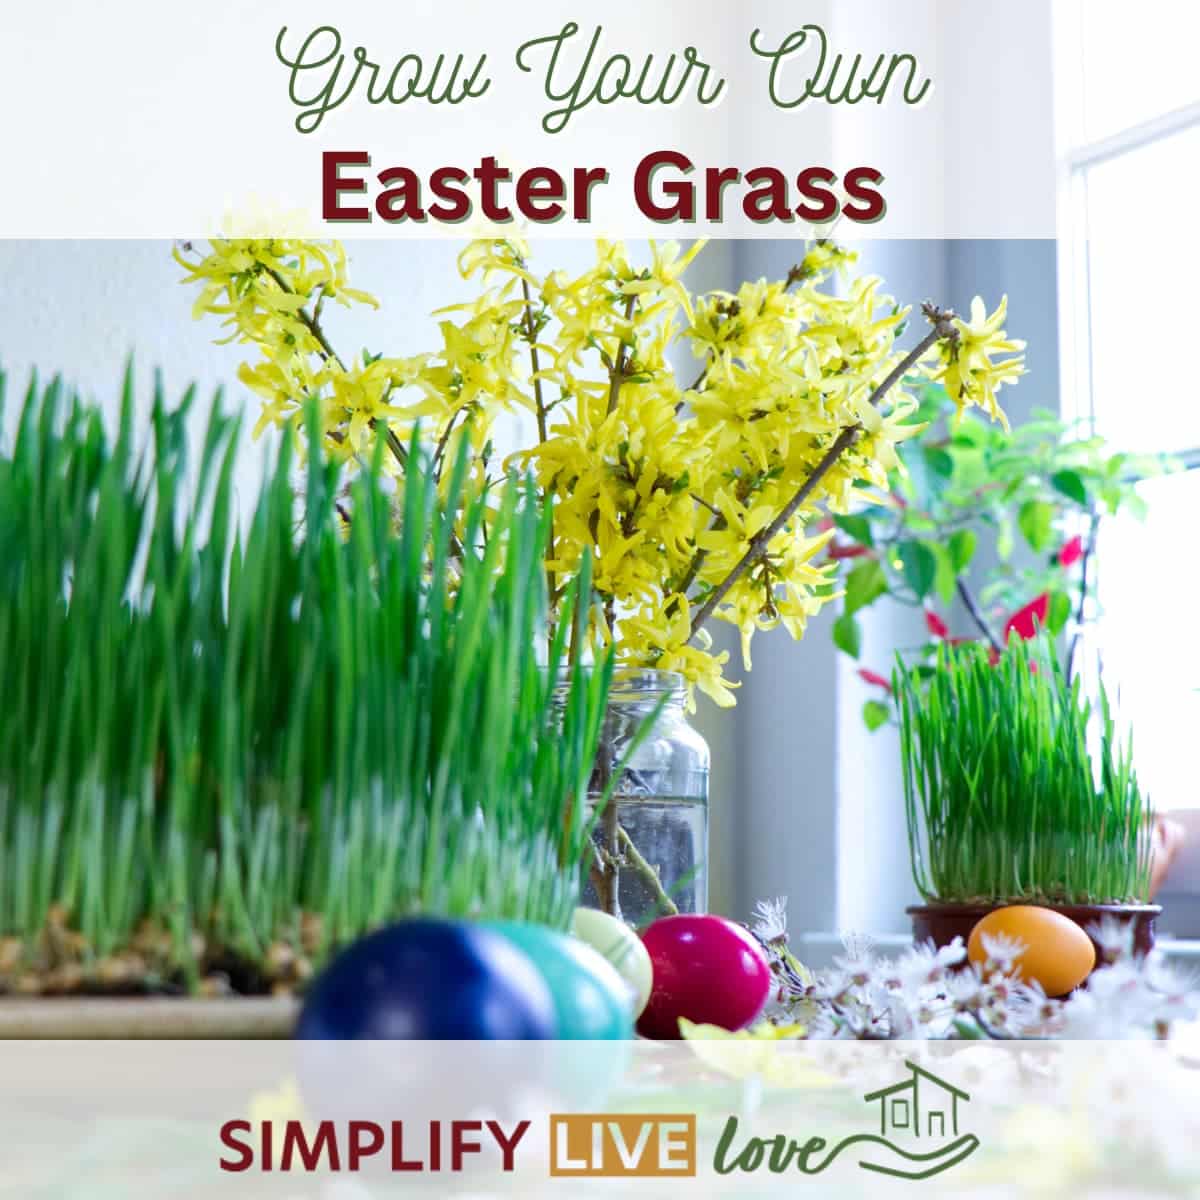 Get your Easter grass growing! Here's how to sprout this holiday staple